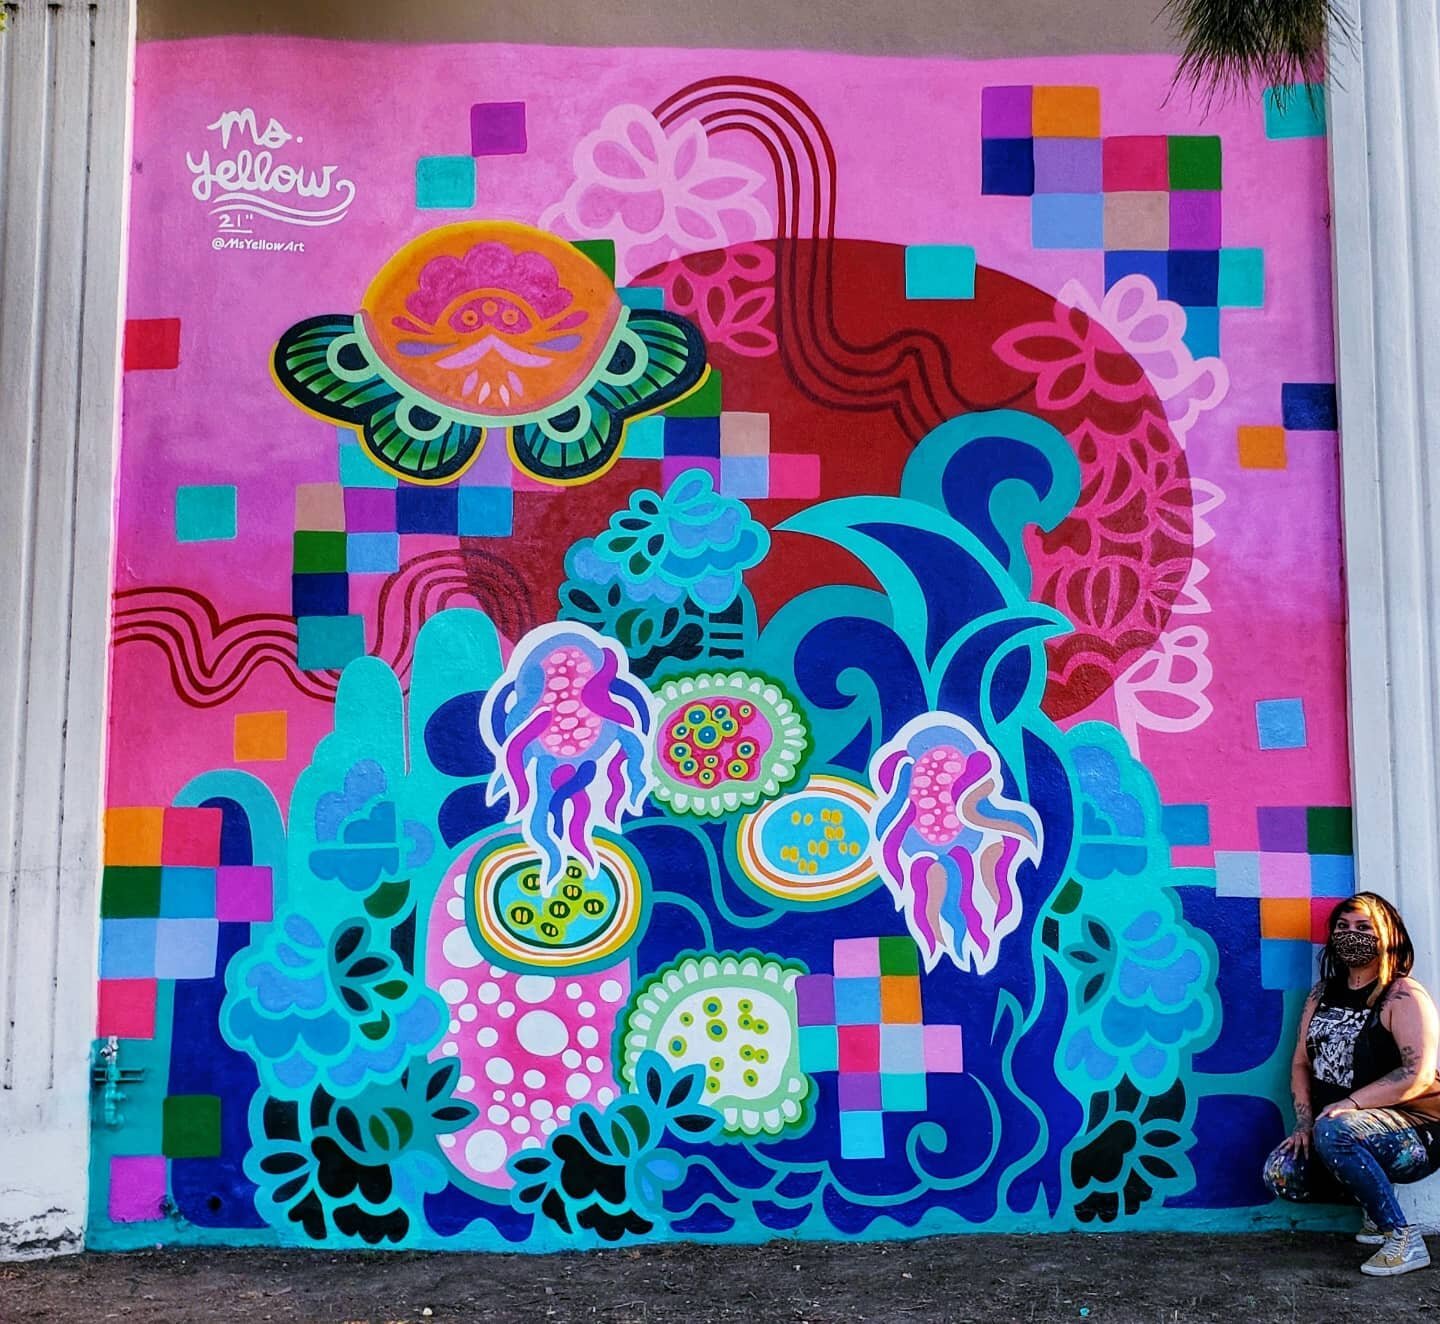 🌺🏝☀️ This bright new mural by @msyellowart is like paradise on a wall 🦋🏵🐙 Find it at @altalomaelementaryschool!! 

🌊 Cheers to our sponsors @giphyarts 🦠 @kobrapaint 🎨 @liquiddeath ☠ @1111.projects 🖌 &amp; members of @minclaorg Public Arts Co